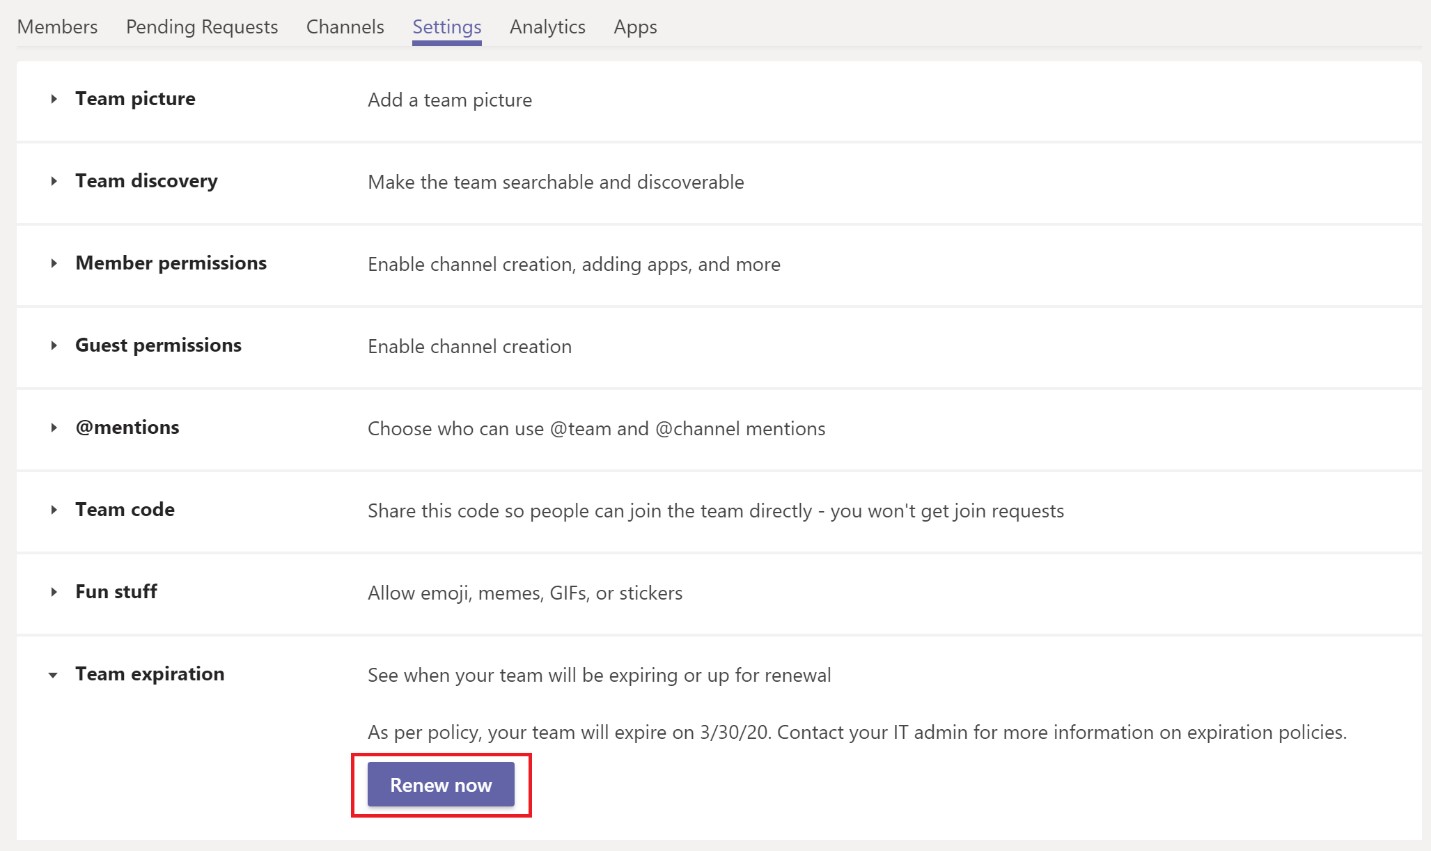 Microsoft Teams security expiration policies and settings